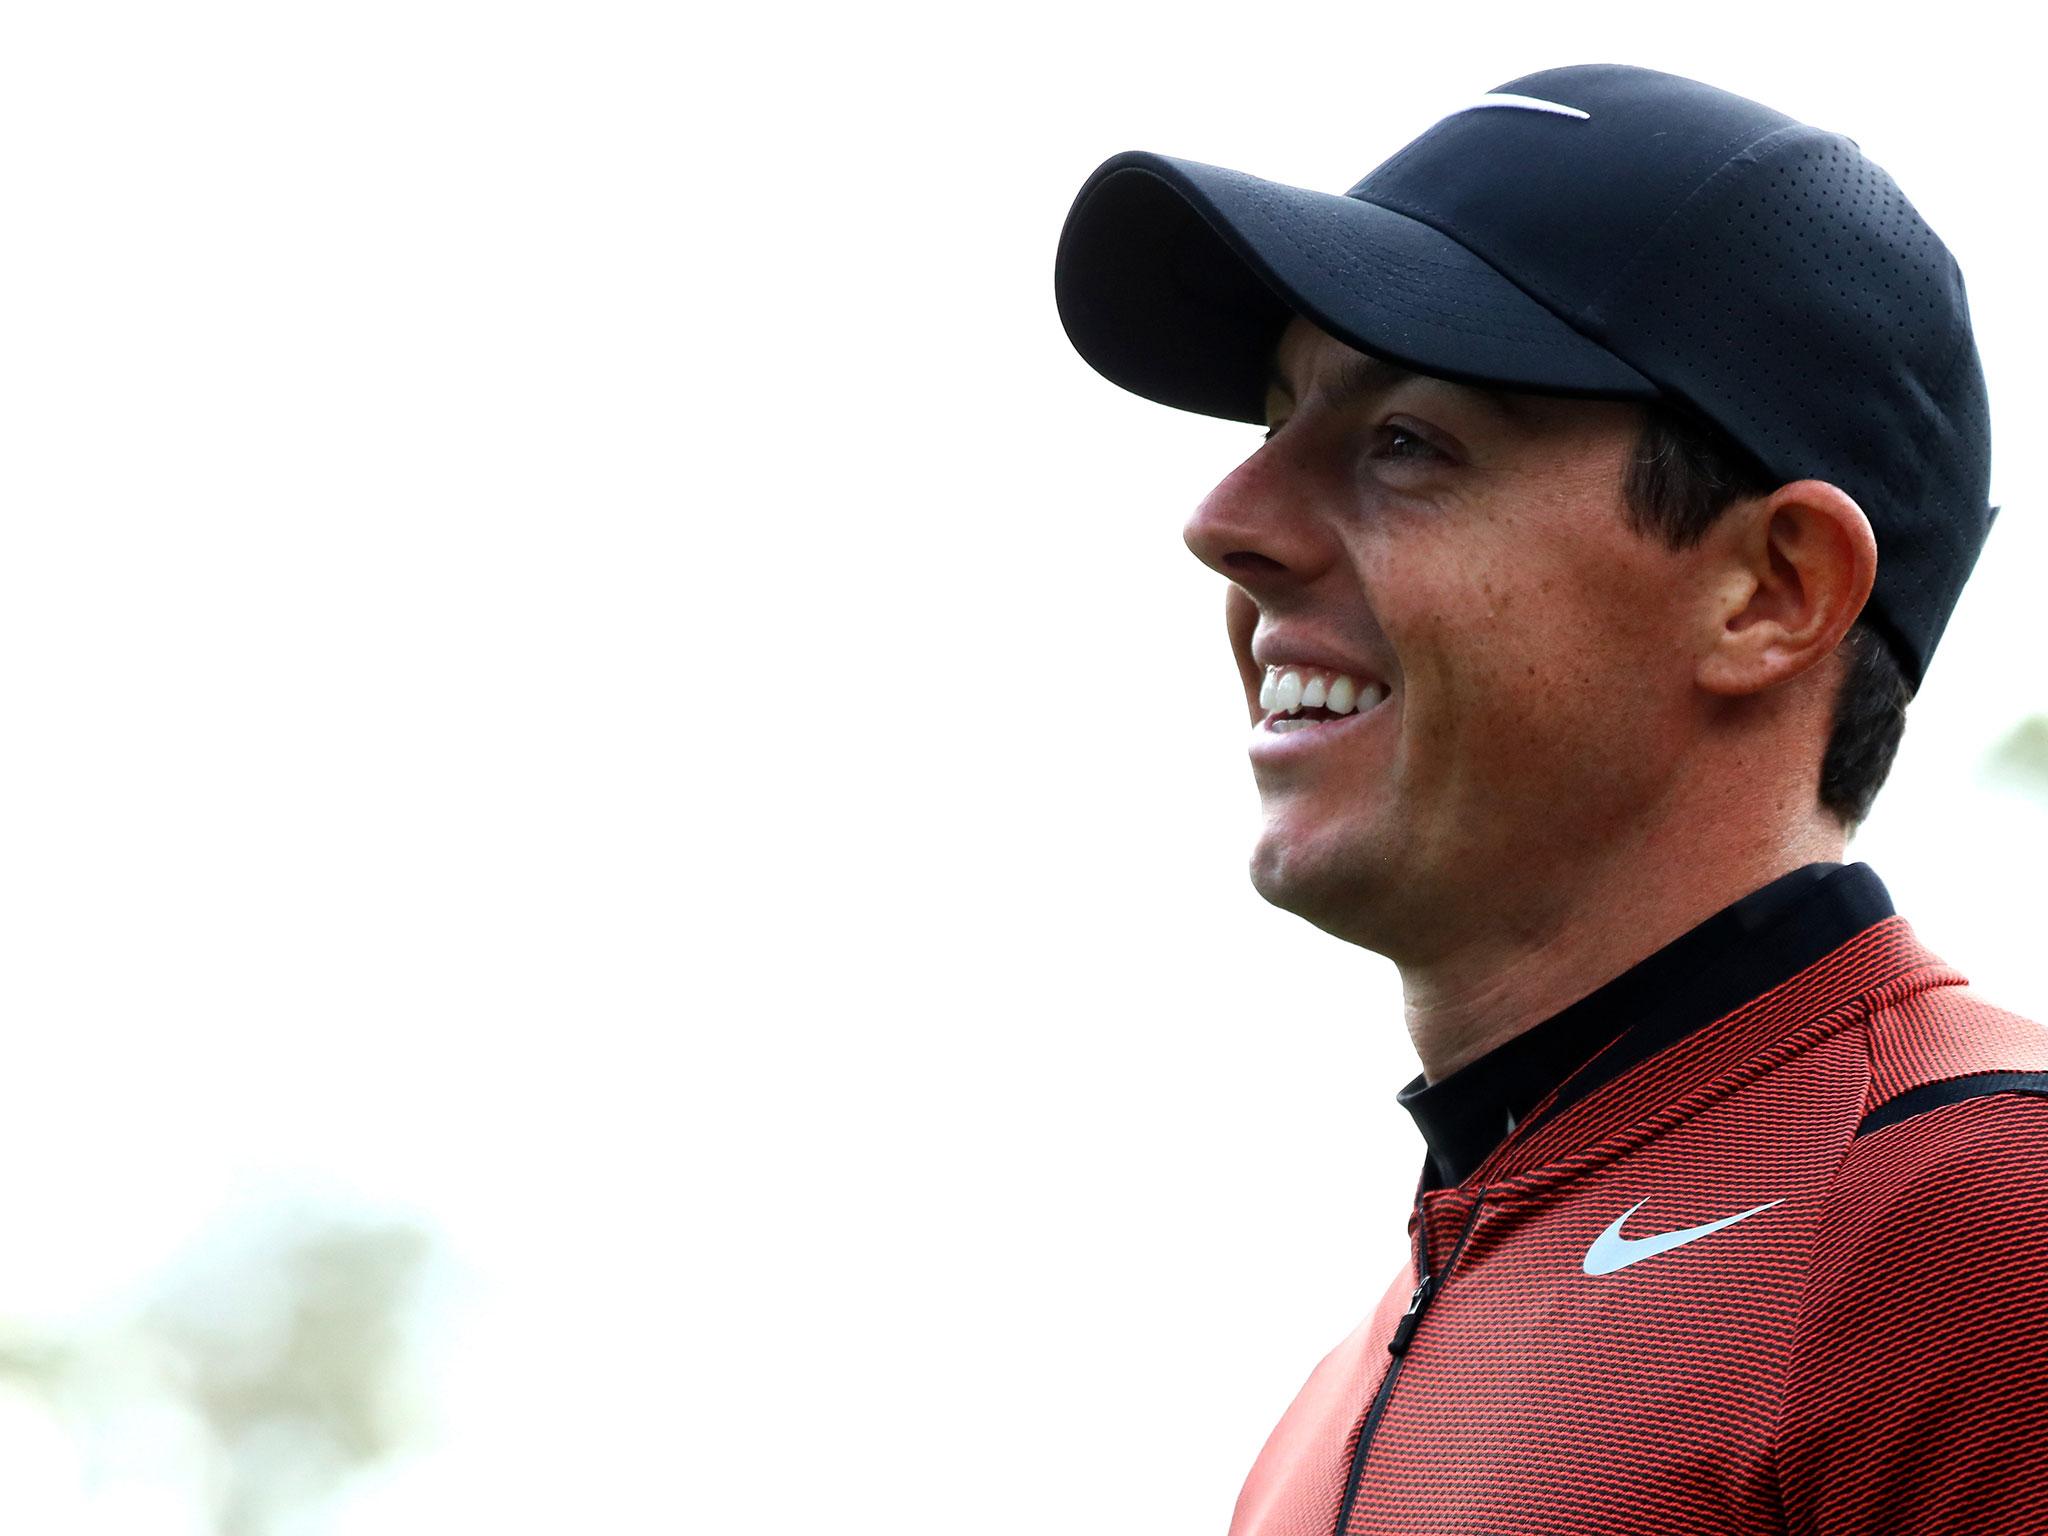 Rory McIlroy was delighted to escape with an opening round of 72